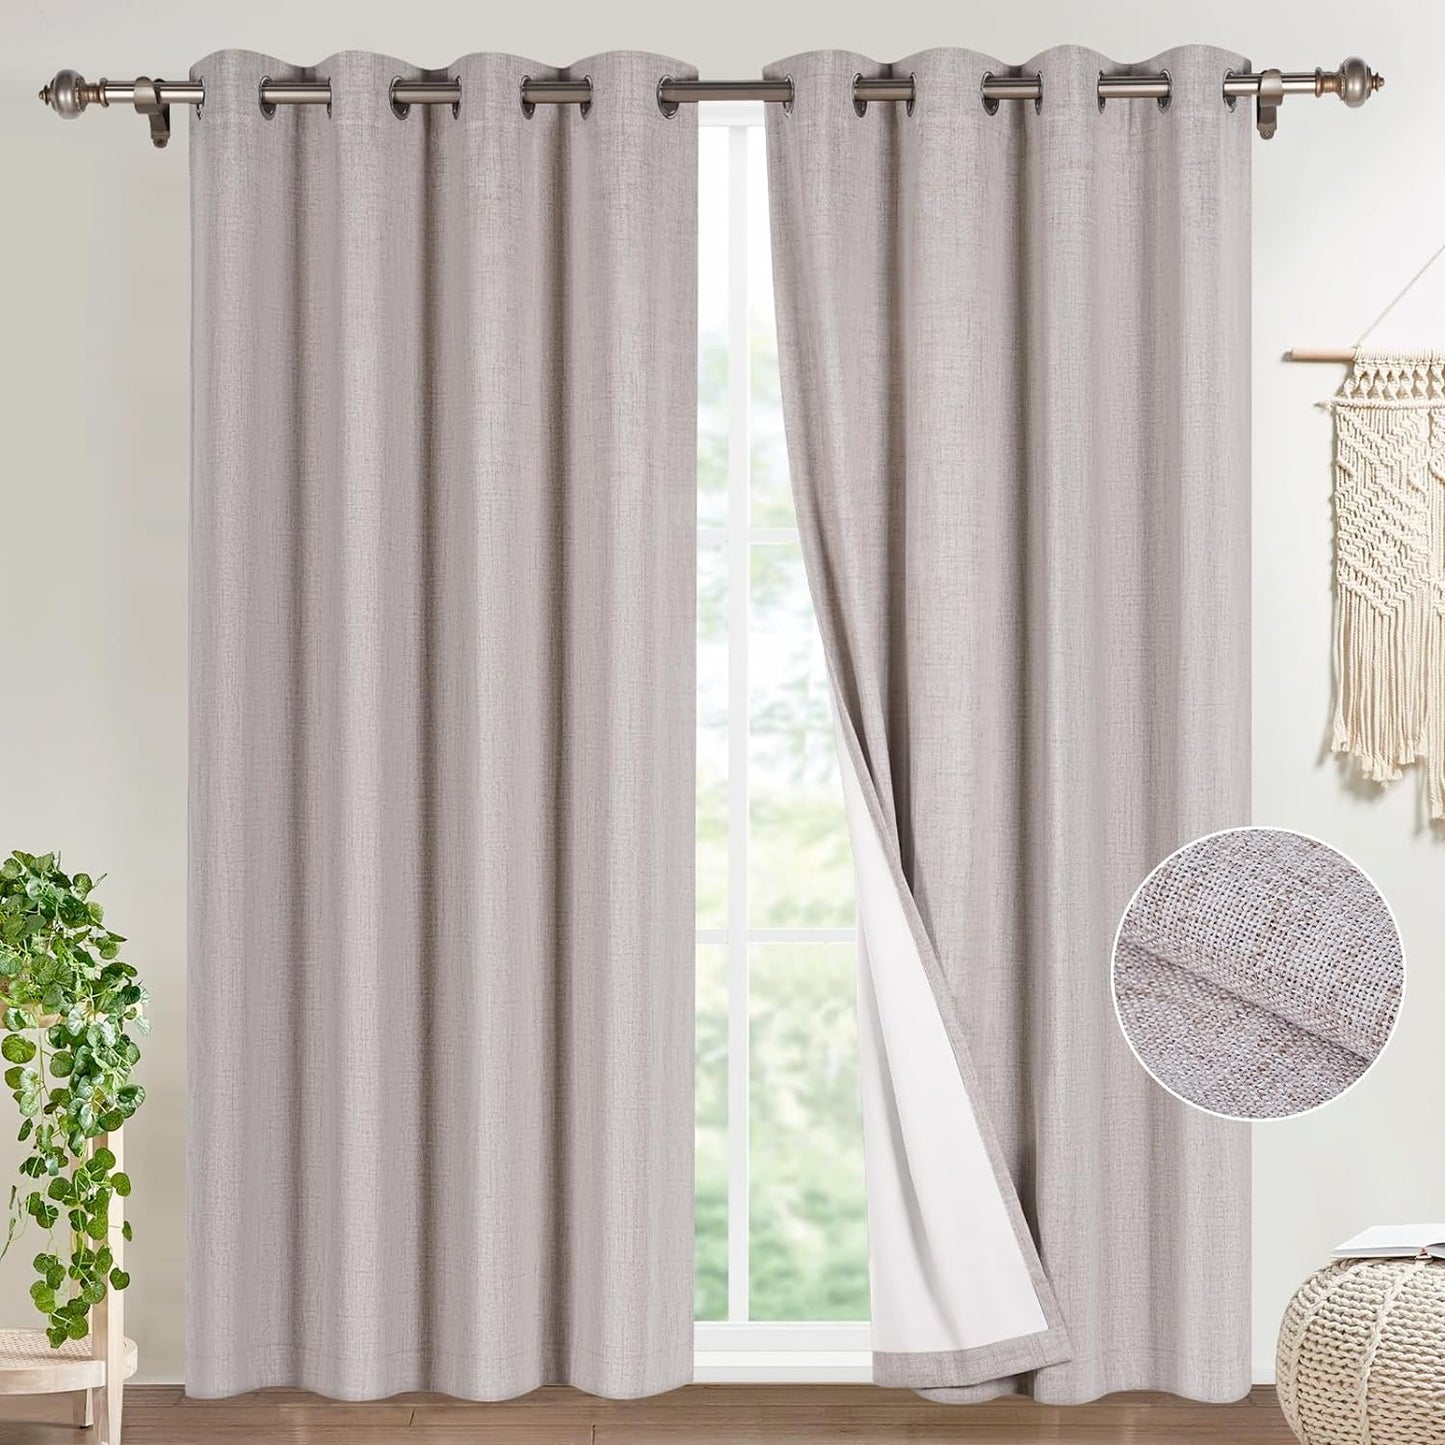 Timeles 100% Blackout Window Curtains 84 Inch Length for Living Room Textured Linen Curtains Sliver Grommet Pinch Pleated Room Darkening Curtain with White Liner/Ties(2 Panel W52 X L84, Ivory)  Timeles Natural W52" X L84" 